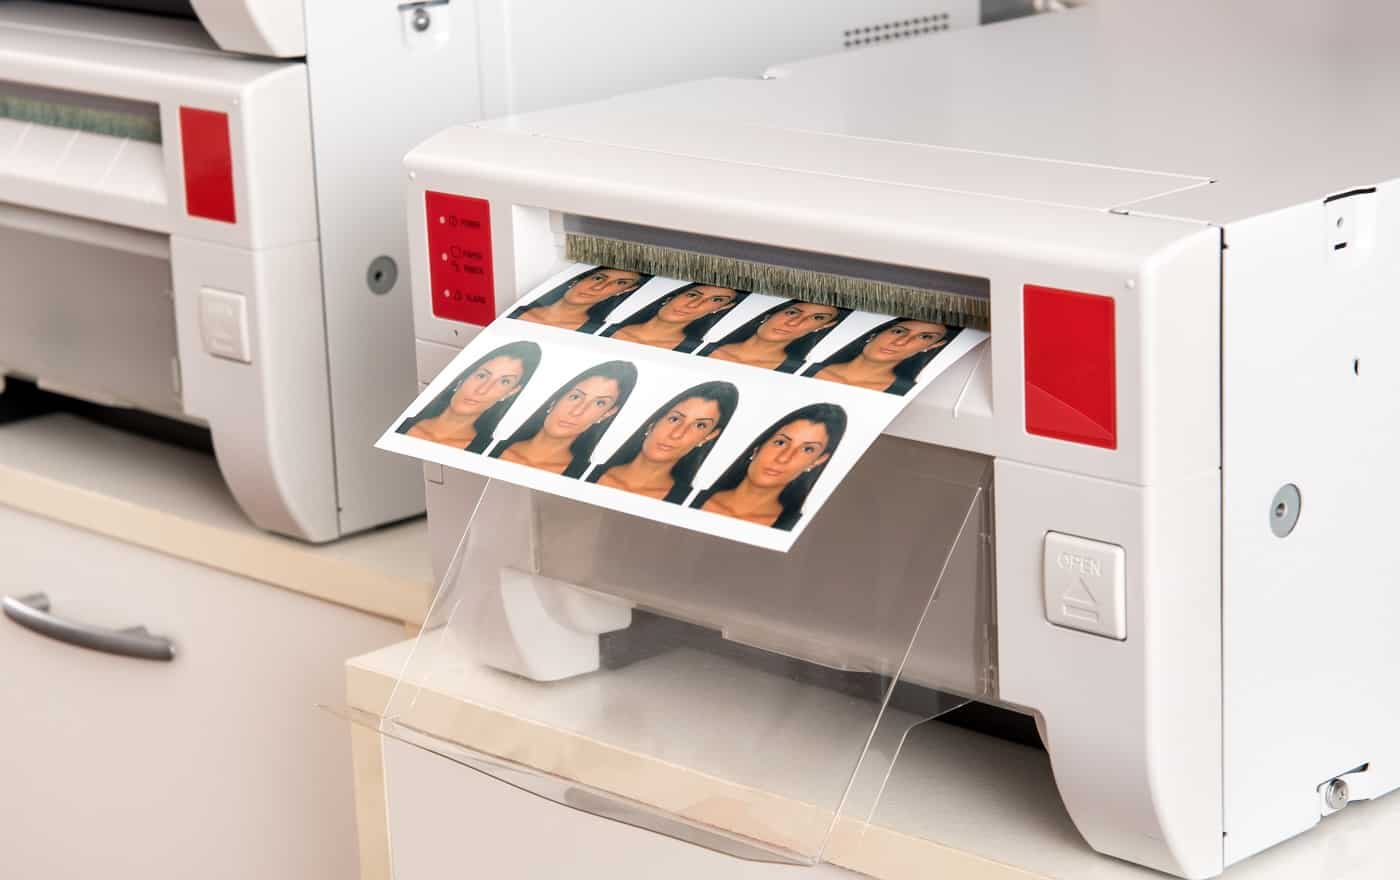 Printing passport photos of a woman on a printer with a sheet of eight photographs exiting the machine in a close up view